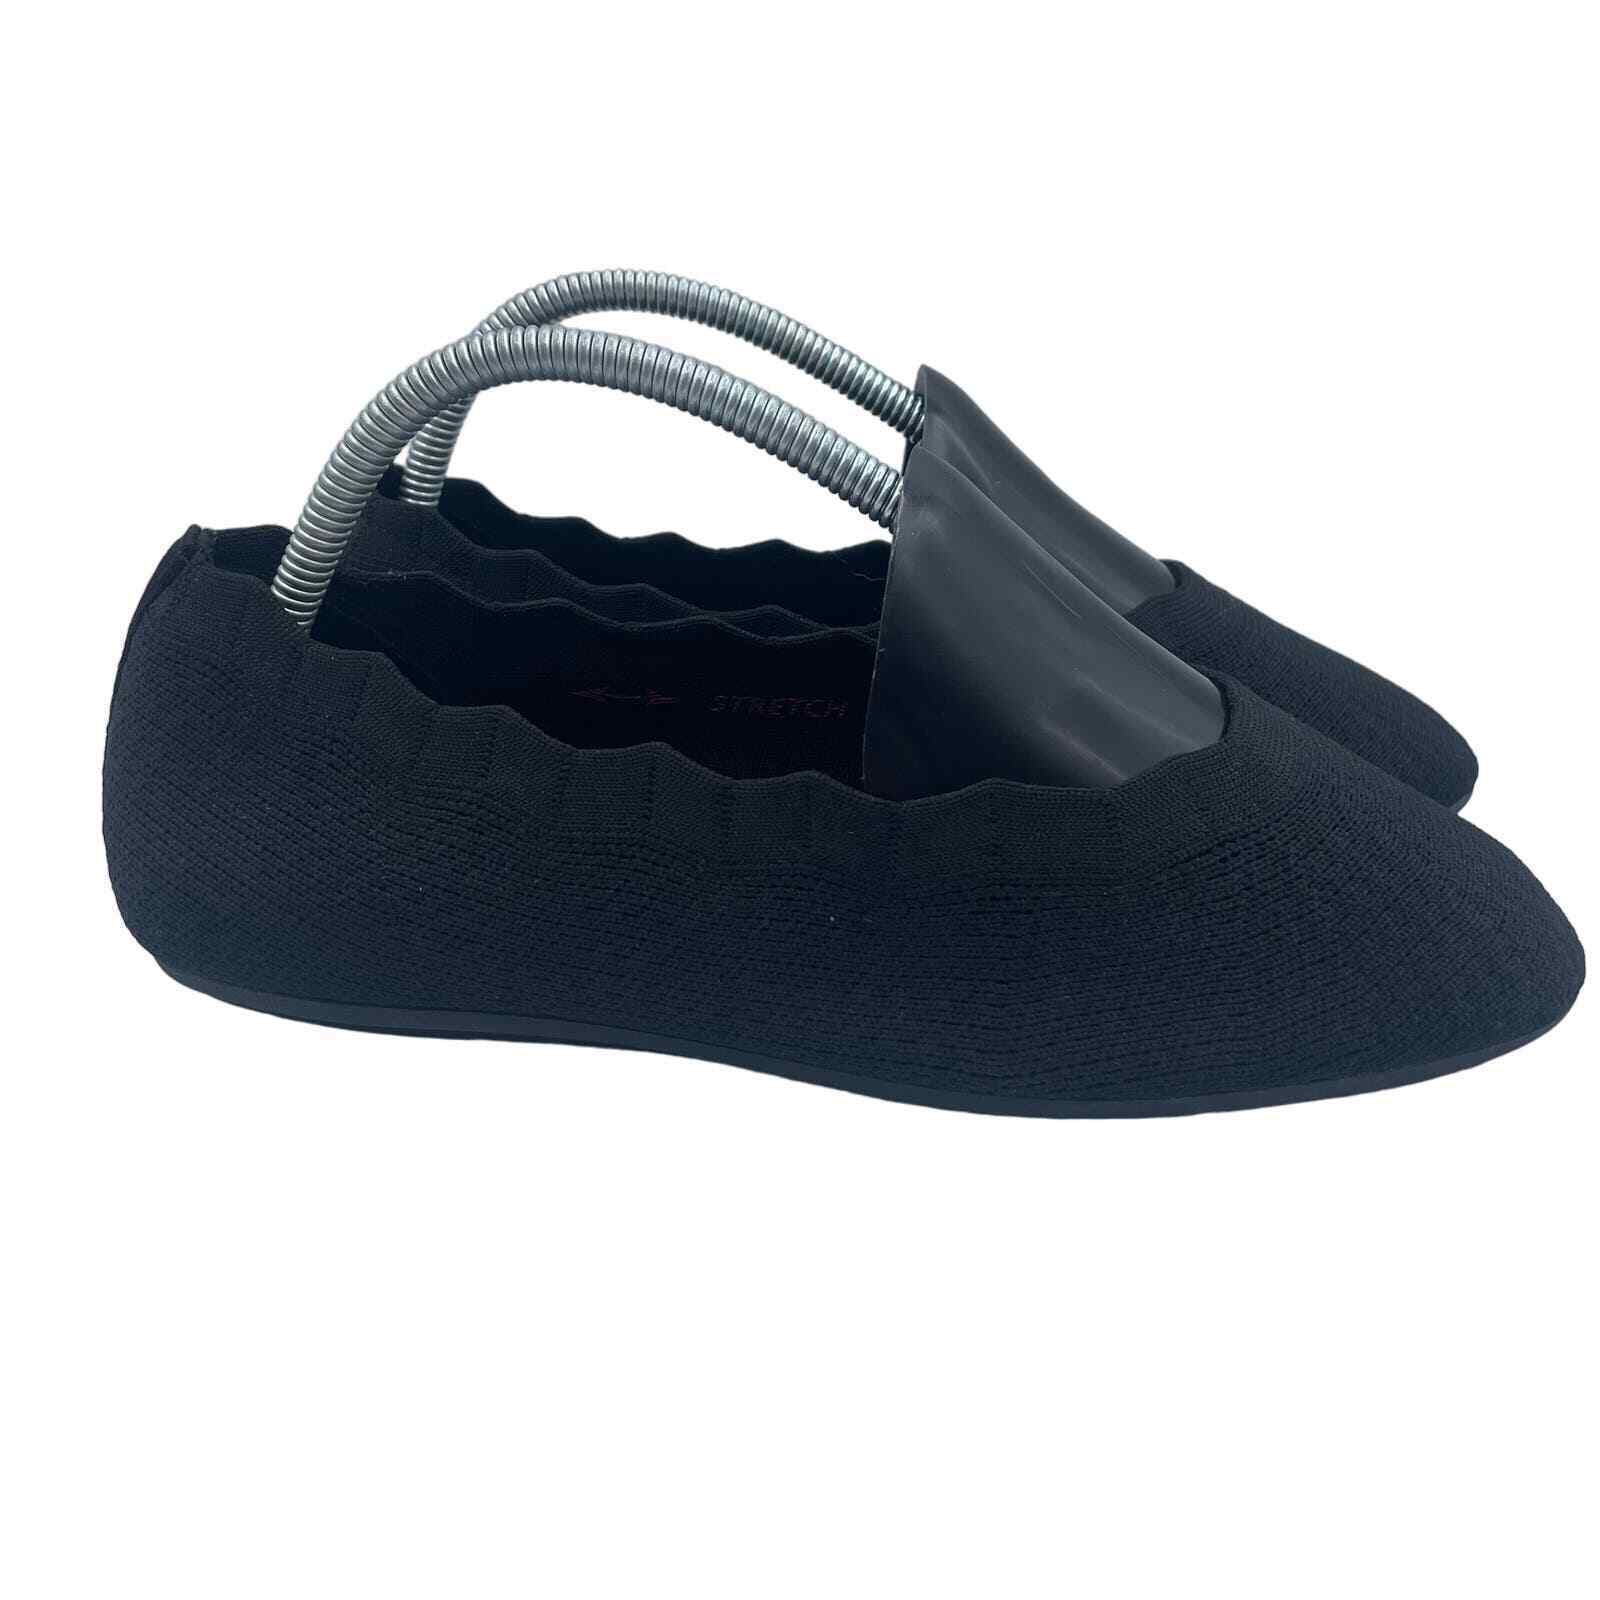 Primary image for Skechers Cleo 2.0 Love Spell Ballet Flats Shoes Black Comfort Womens 8 Wide